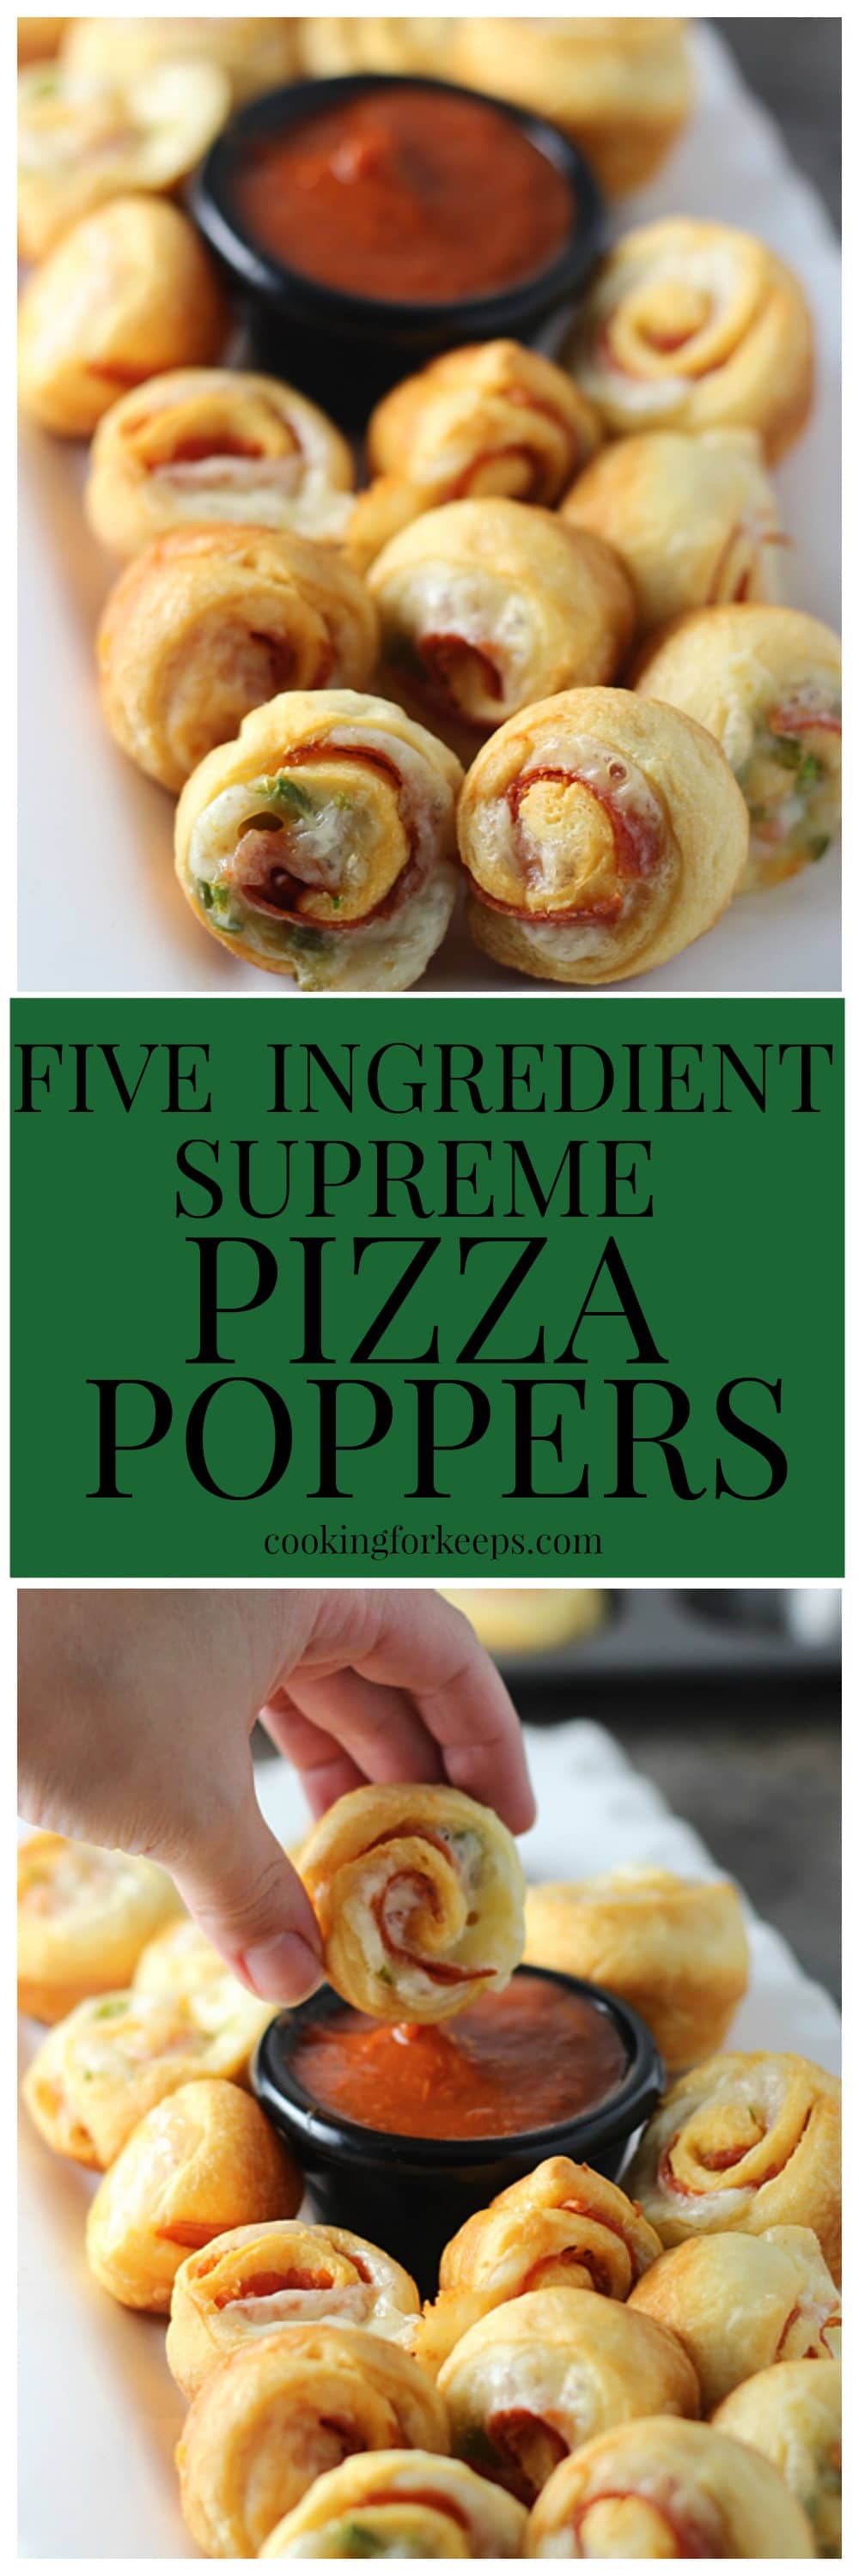 Five Ingredient Supreme Pizza Poppers -- Ridiculously easy and so addictive!